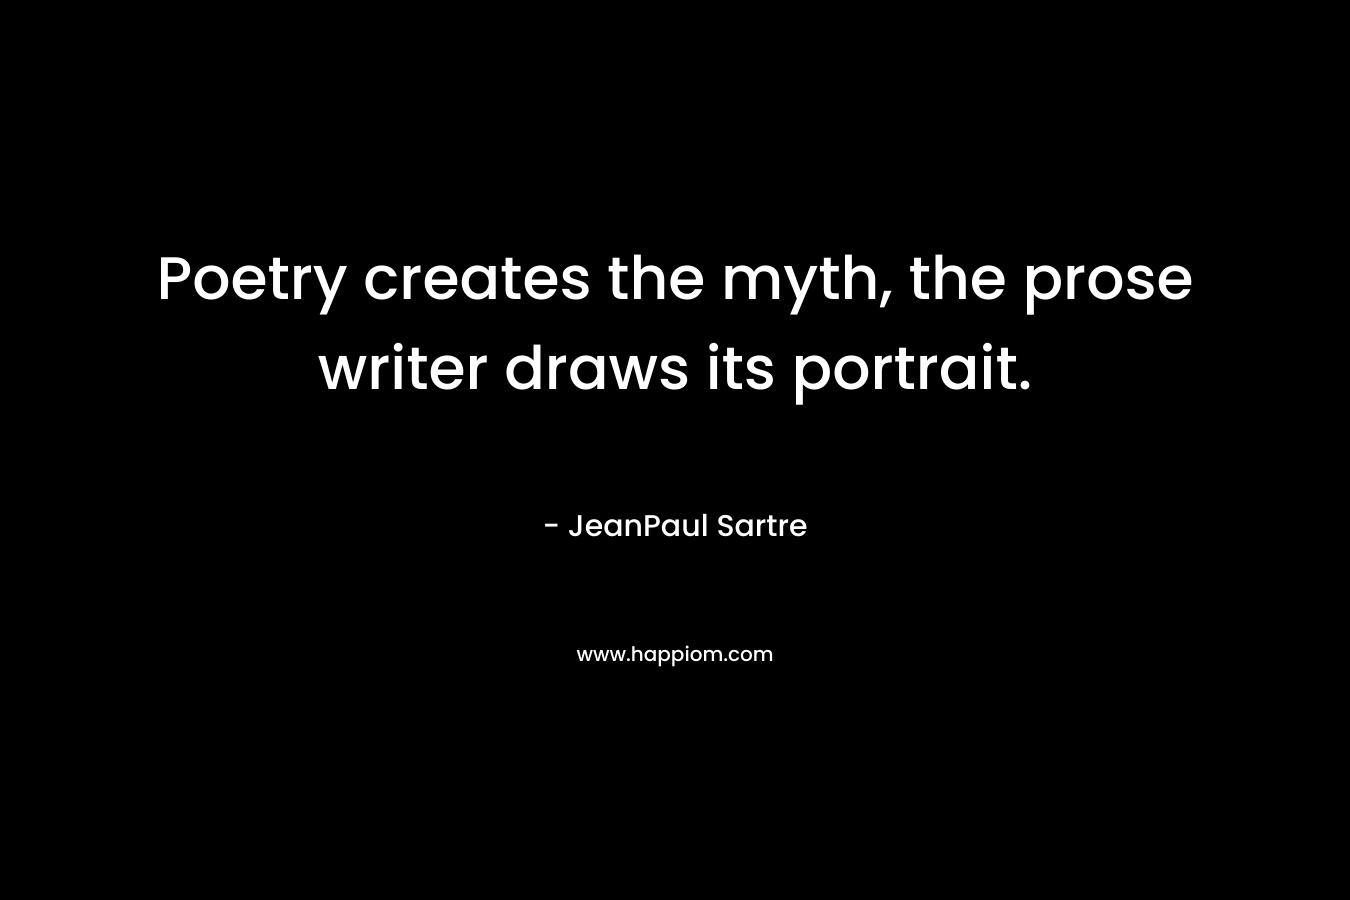 Poetry creates the myth, the prose writer draws its portrait. – JeanPaul Sartre